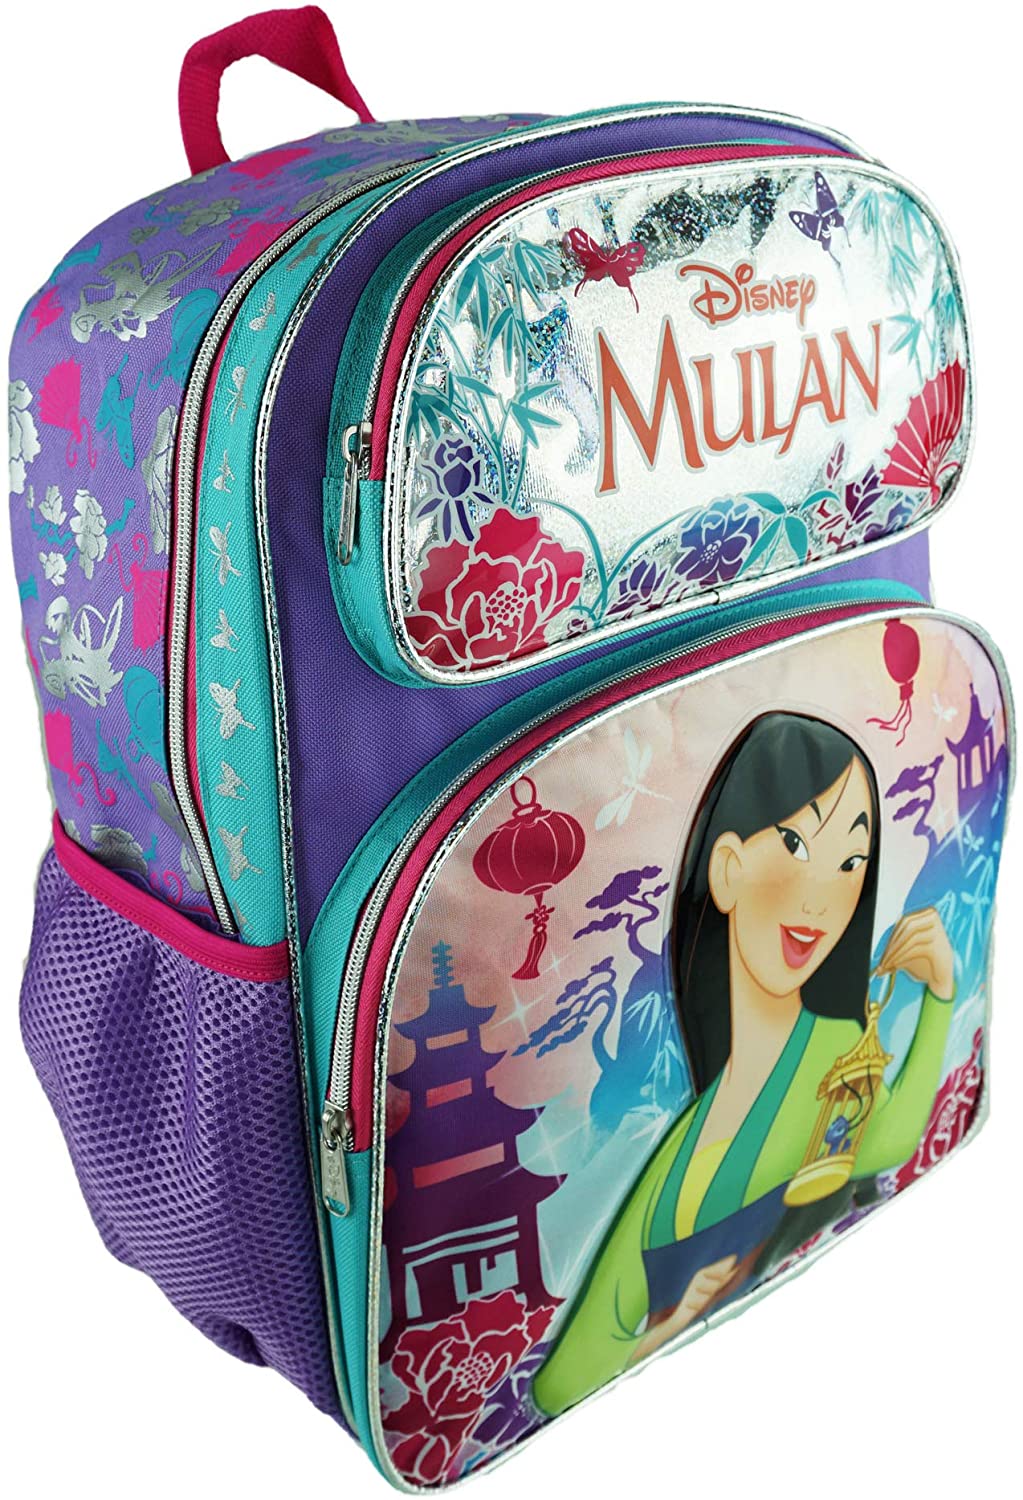 Disney Mulan 16" Full Size Backpack - Pretty and Brave - A19393